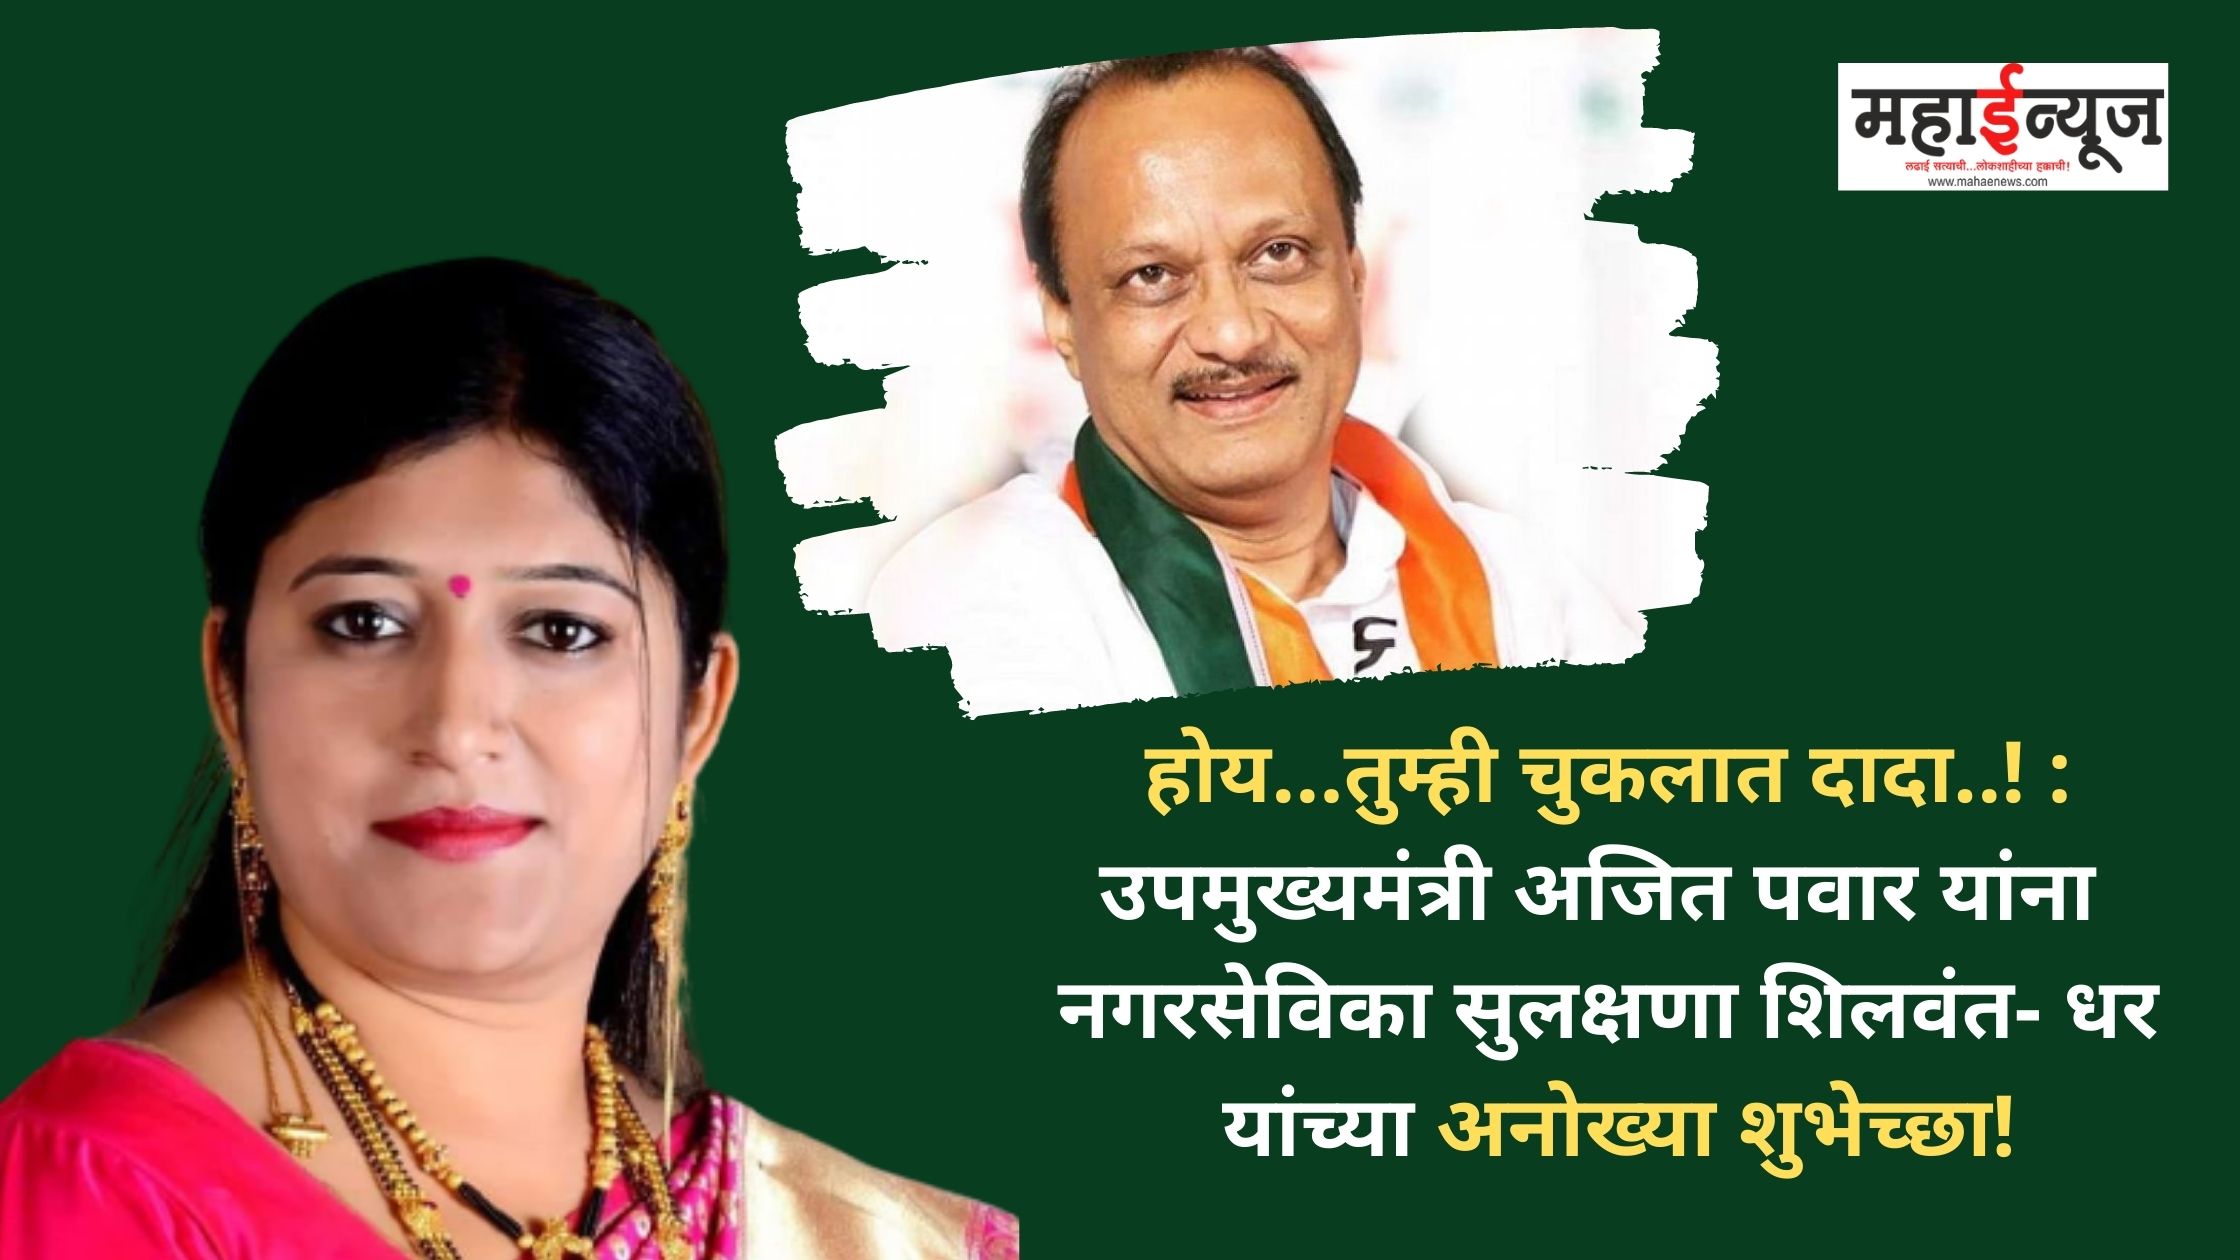 Yes… You made a mistake Dada ..! : Unique wishes from Corporator Sulakshana Shilwant-Dhar to Deputy Chief Minister Ajit Pawar!